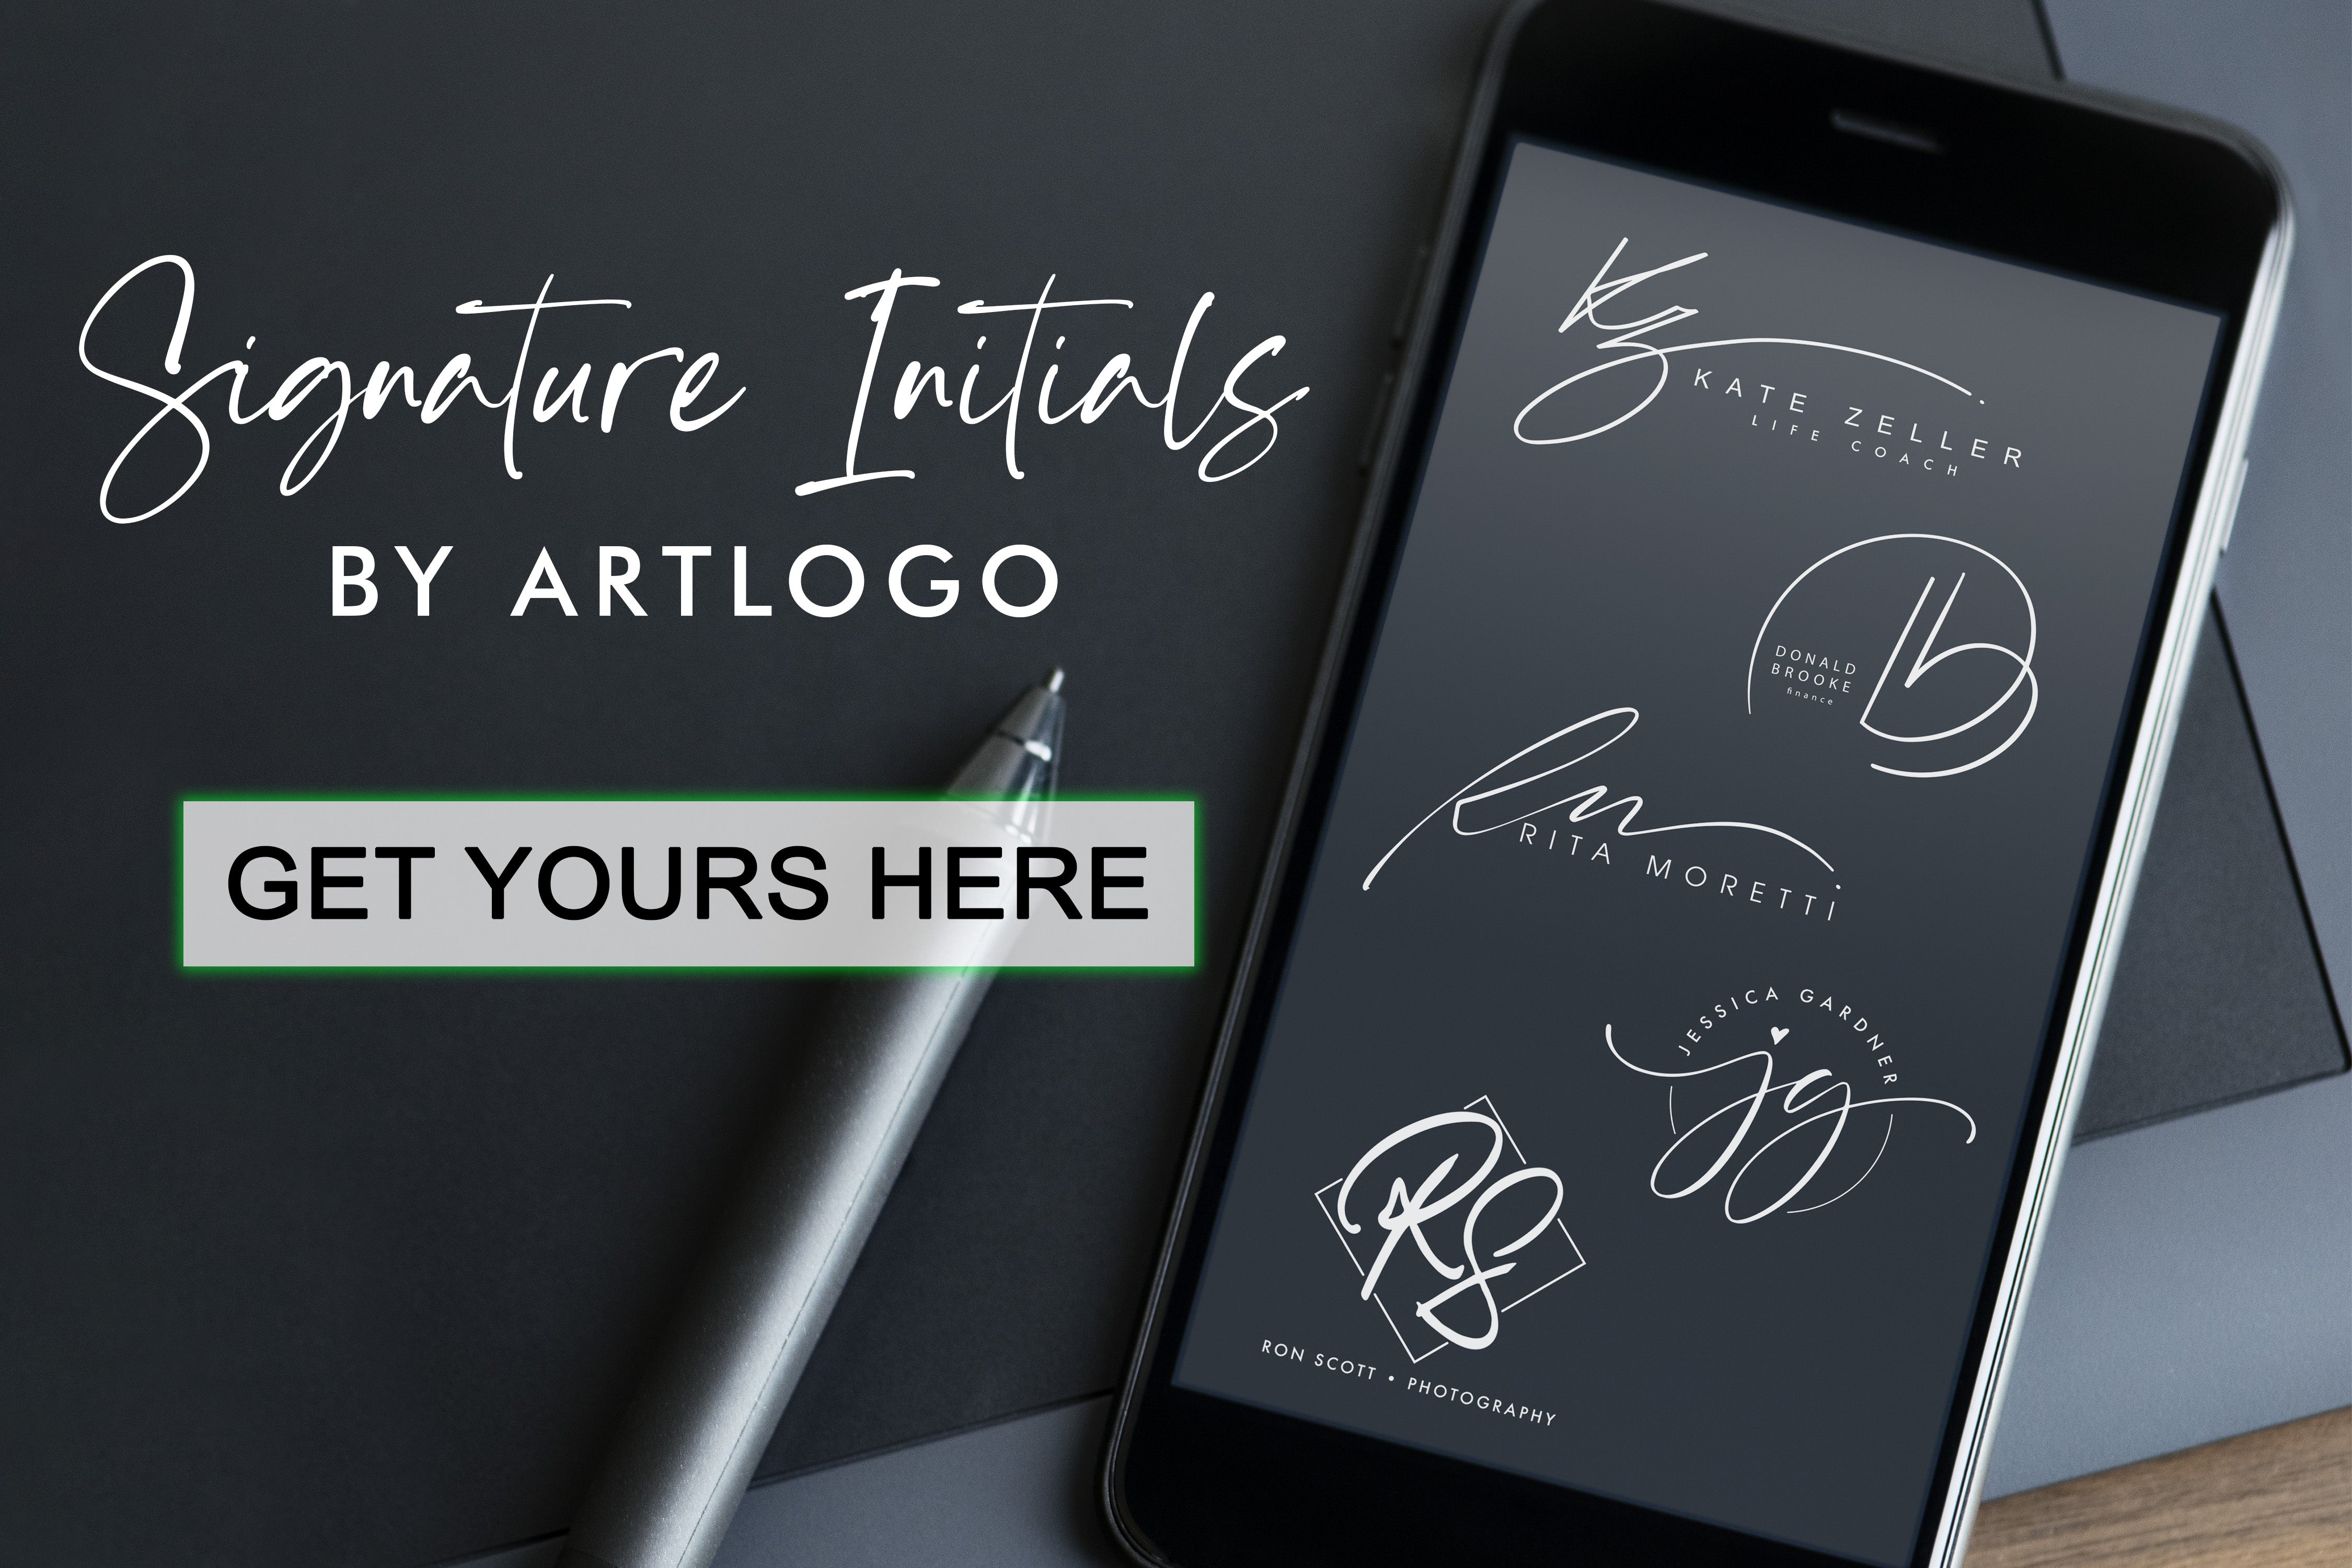 Unlock the power of a signature with initials! Learn how your initials can serve as your unique signature and the legal implications in this guide.